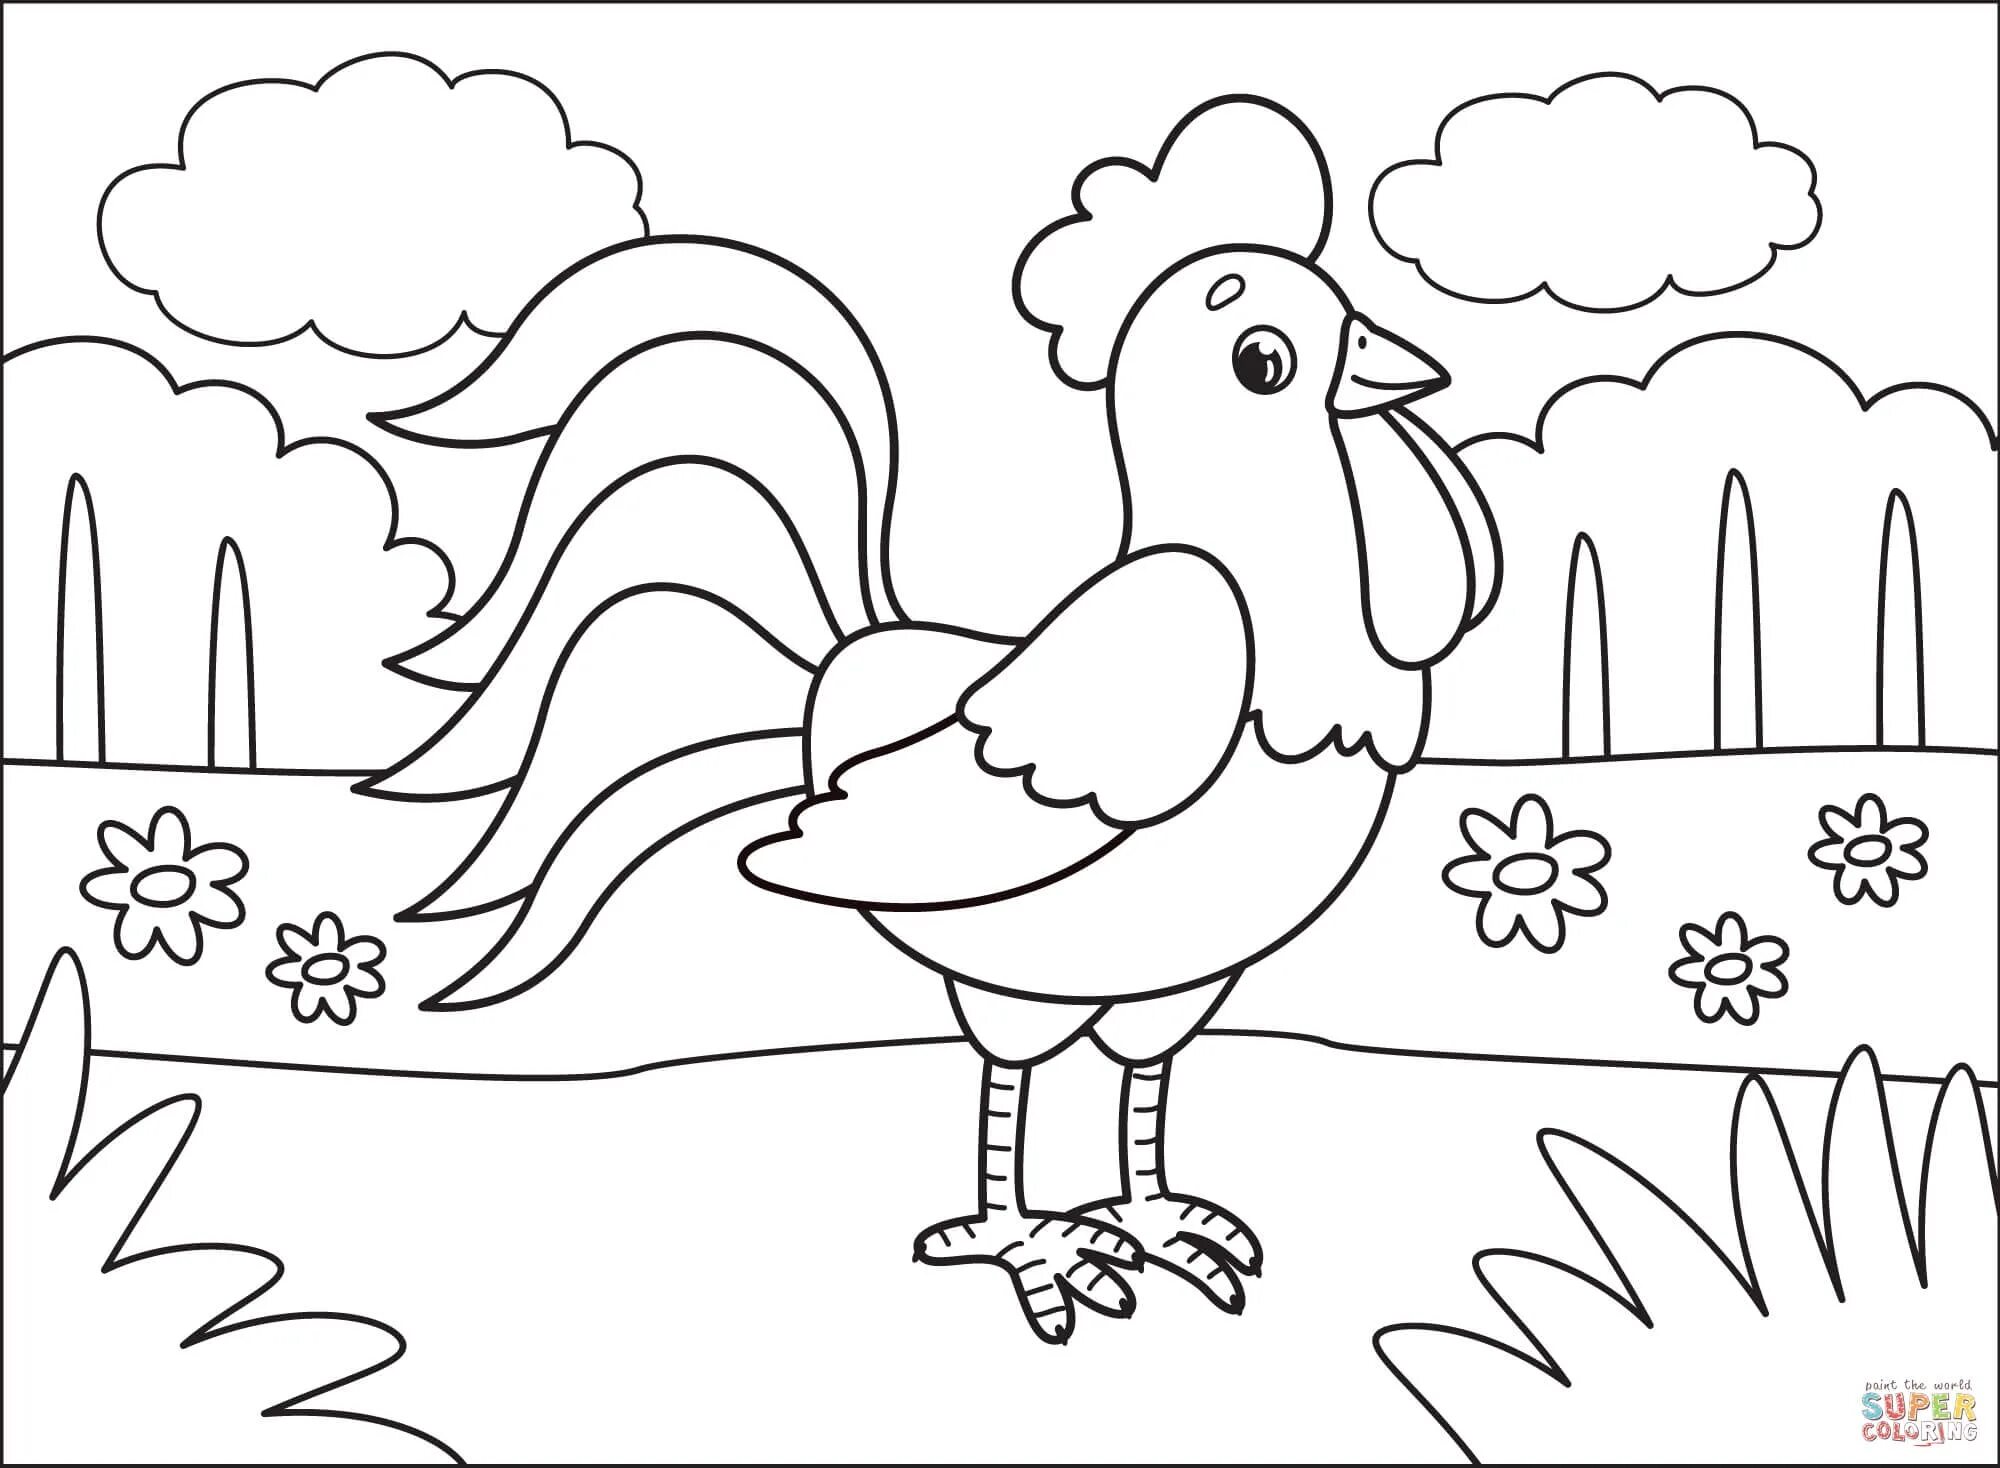 Adventurous rooster coloring for kids